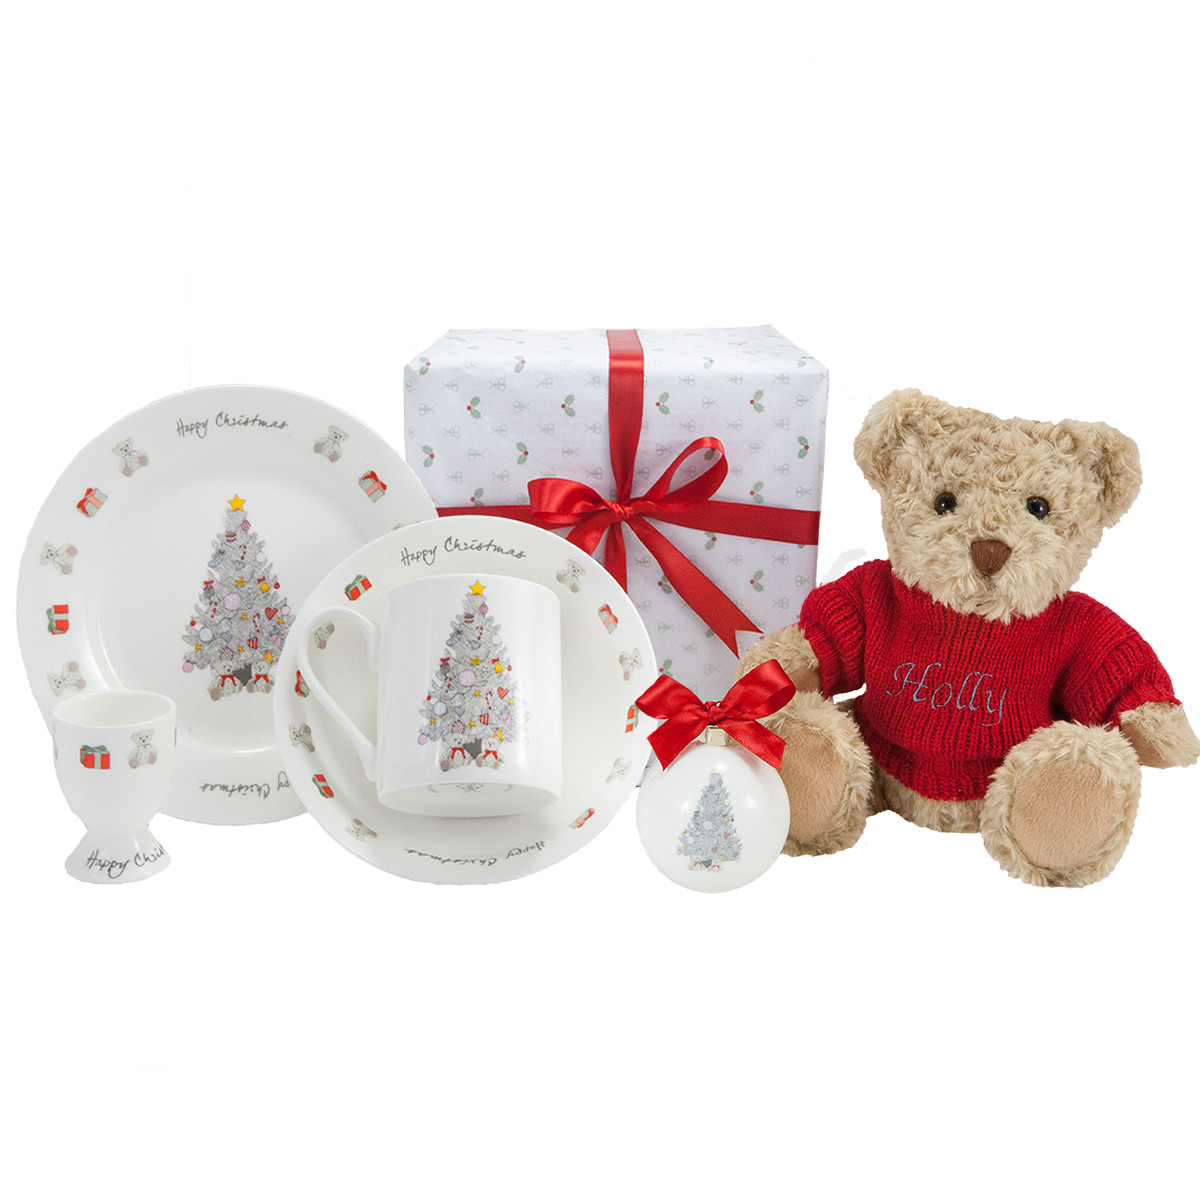 Newborn Christmas Gift Ideas
 The Syders Baby s First Christmas Gift Ideas